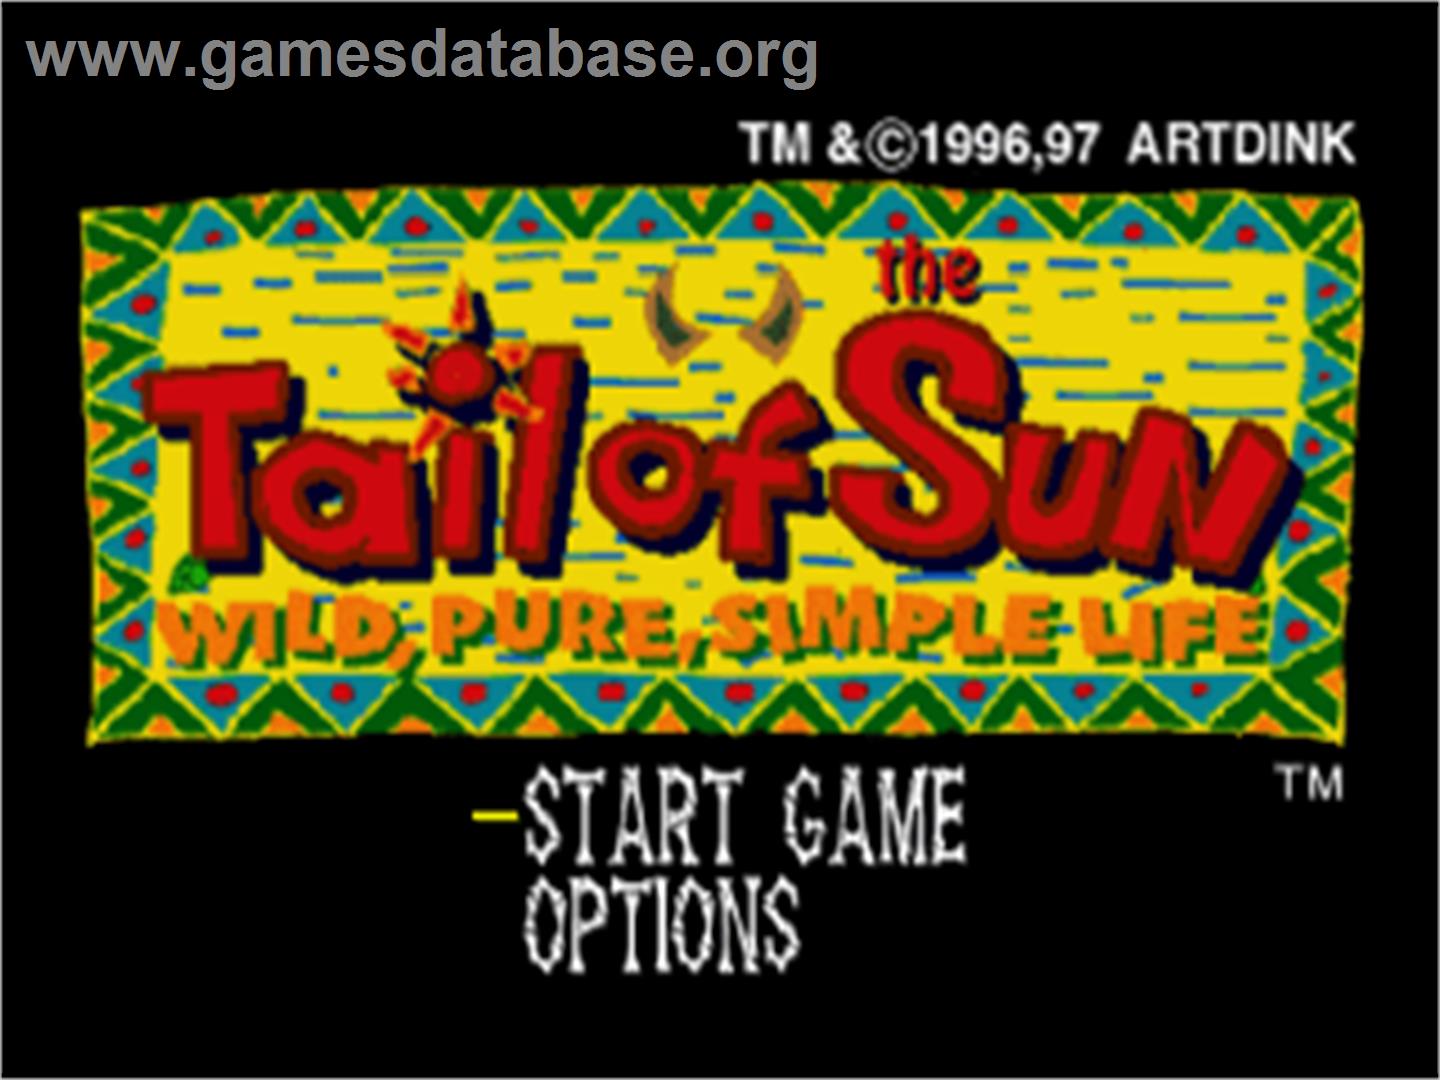 Tail of the Sun - Sony Playstation - Artwork - Title Screen